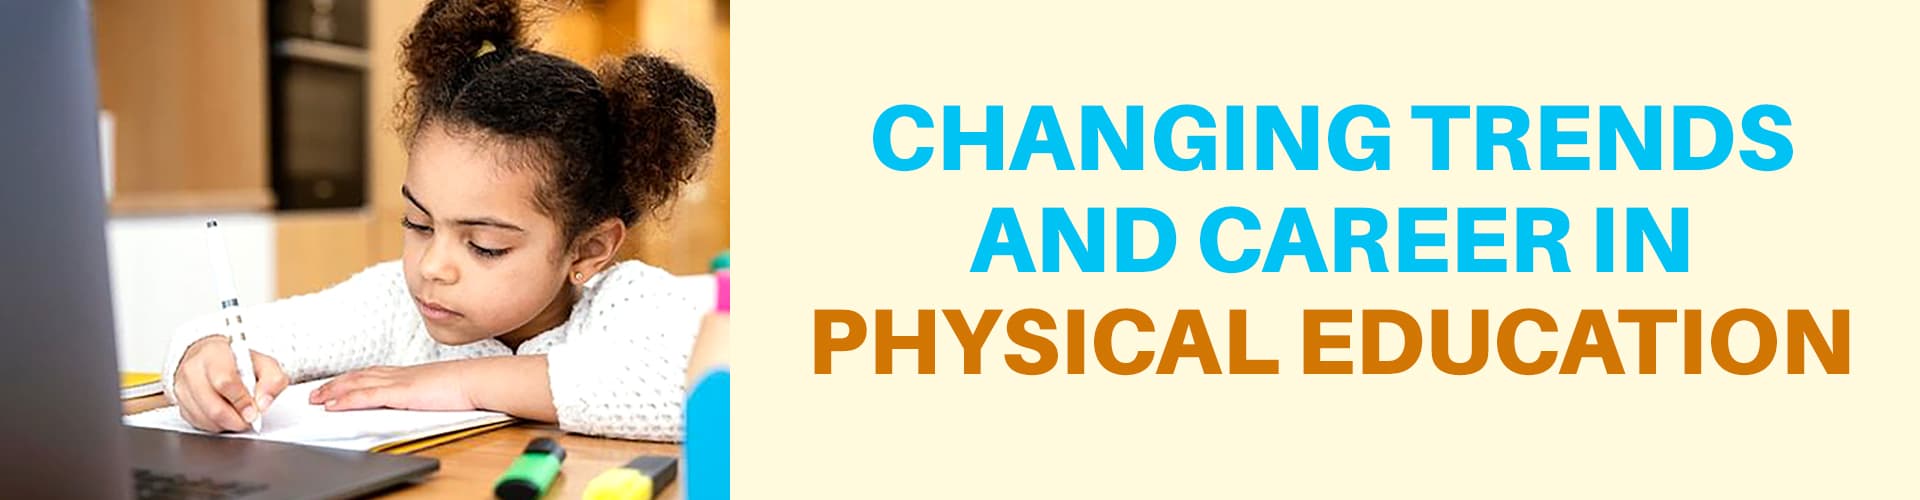 Changing Trends and Career in Physical Education